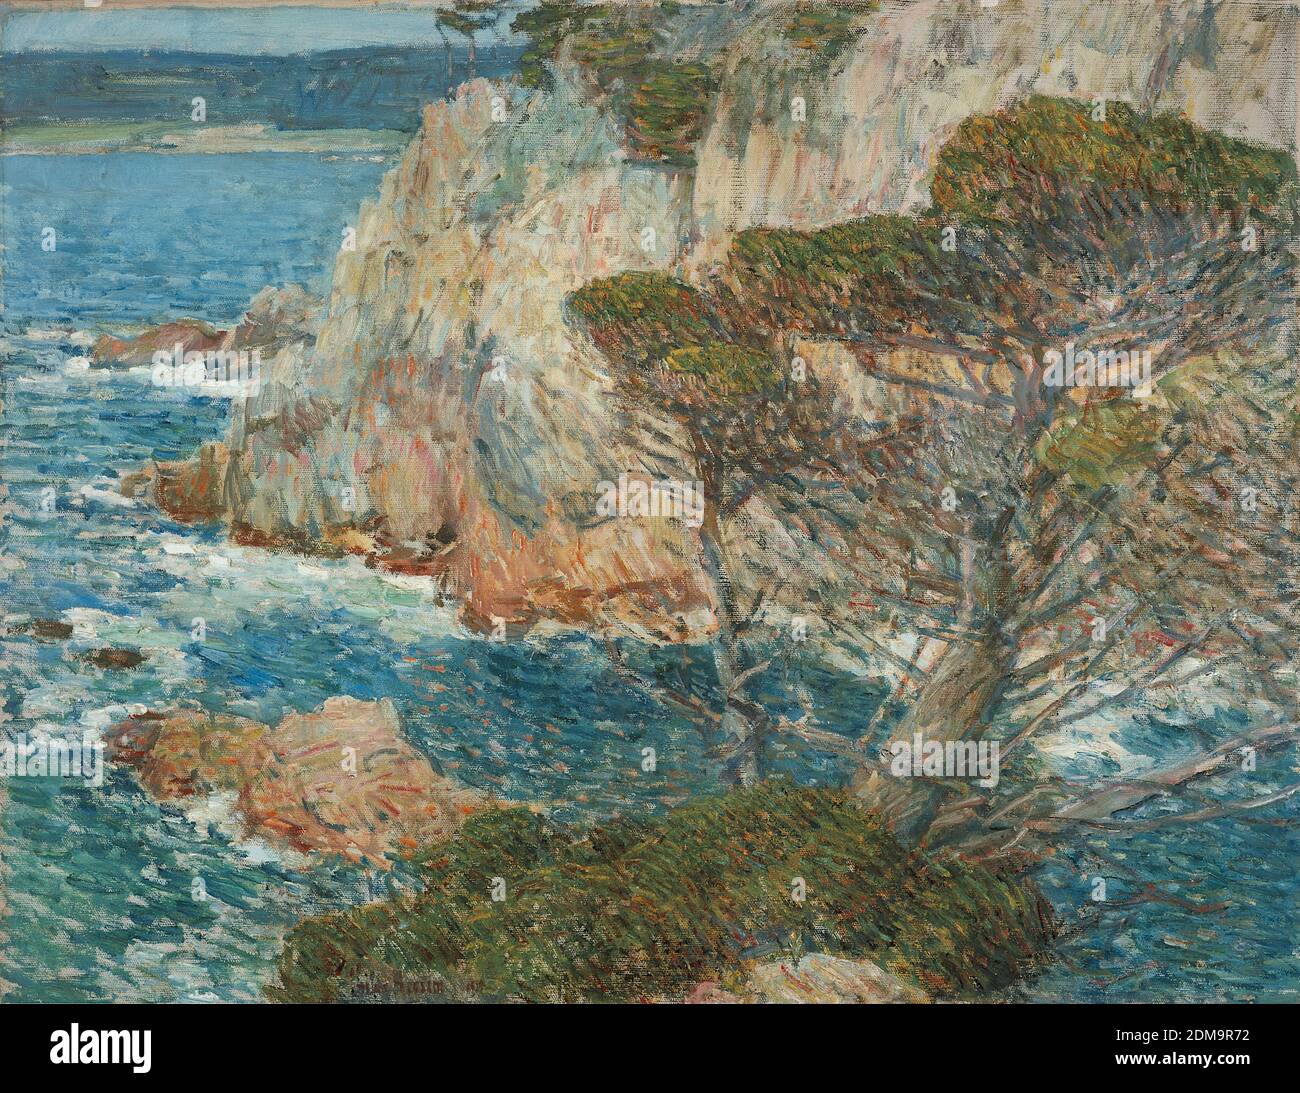 Point Lobos, Carmel 1914 American Impressionist Painting by Childe Hassam - Very high resolution and quality image Stock Photo